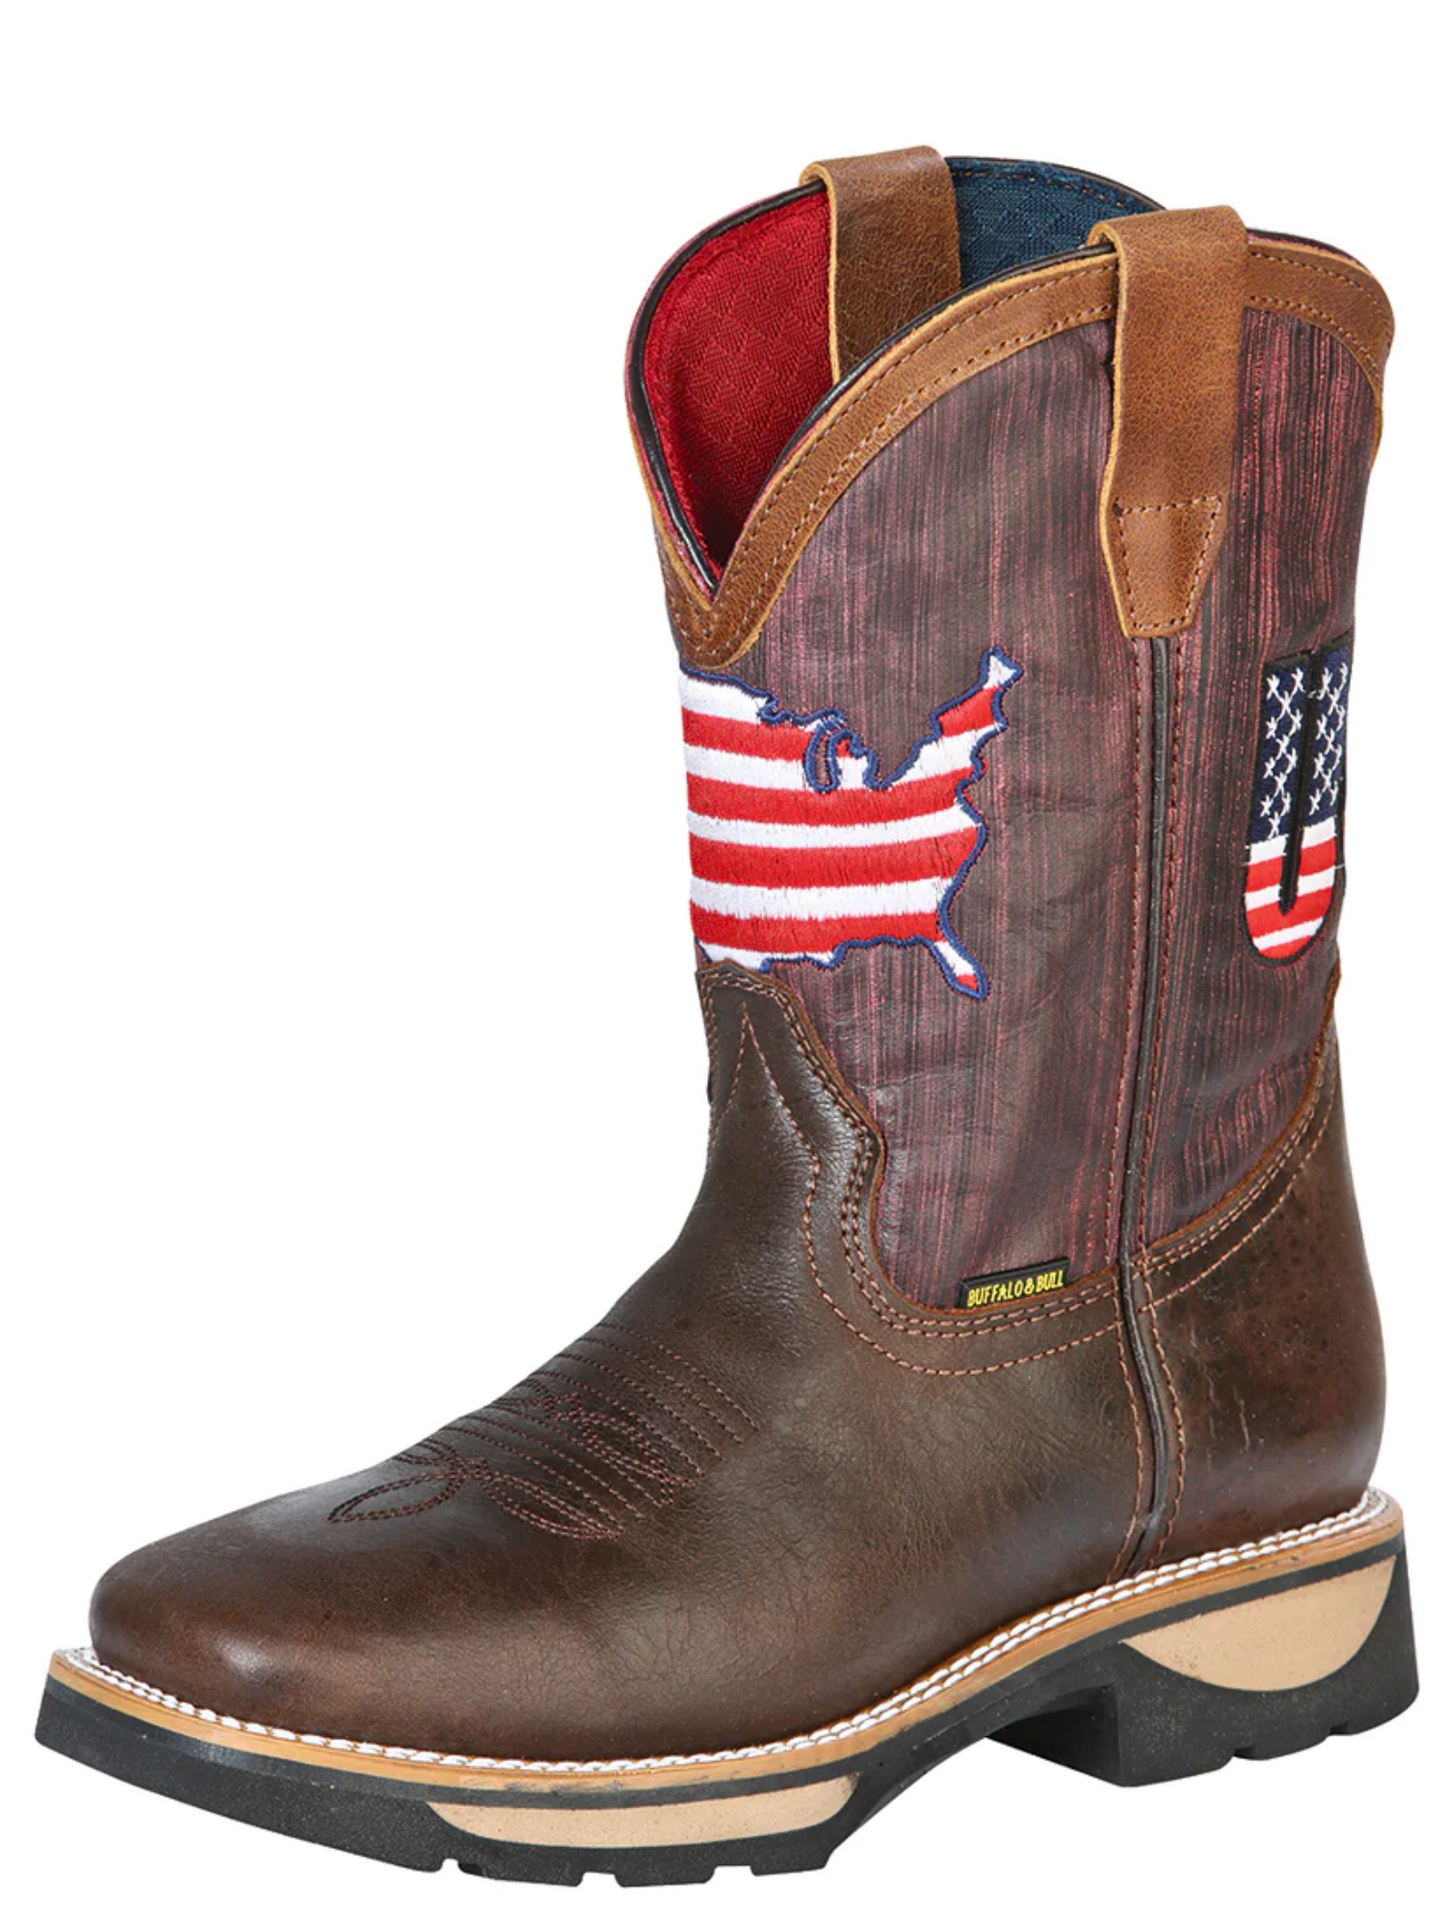 USA Flag Pull-On Tube Rodeo Work Boots with Genuine Leather Soft Toe for Men 'El General' - ID: 126466 Work Boots El General Cafe